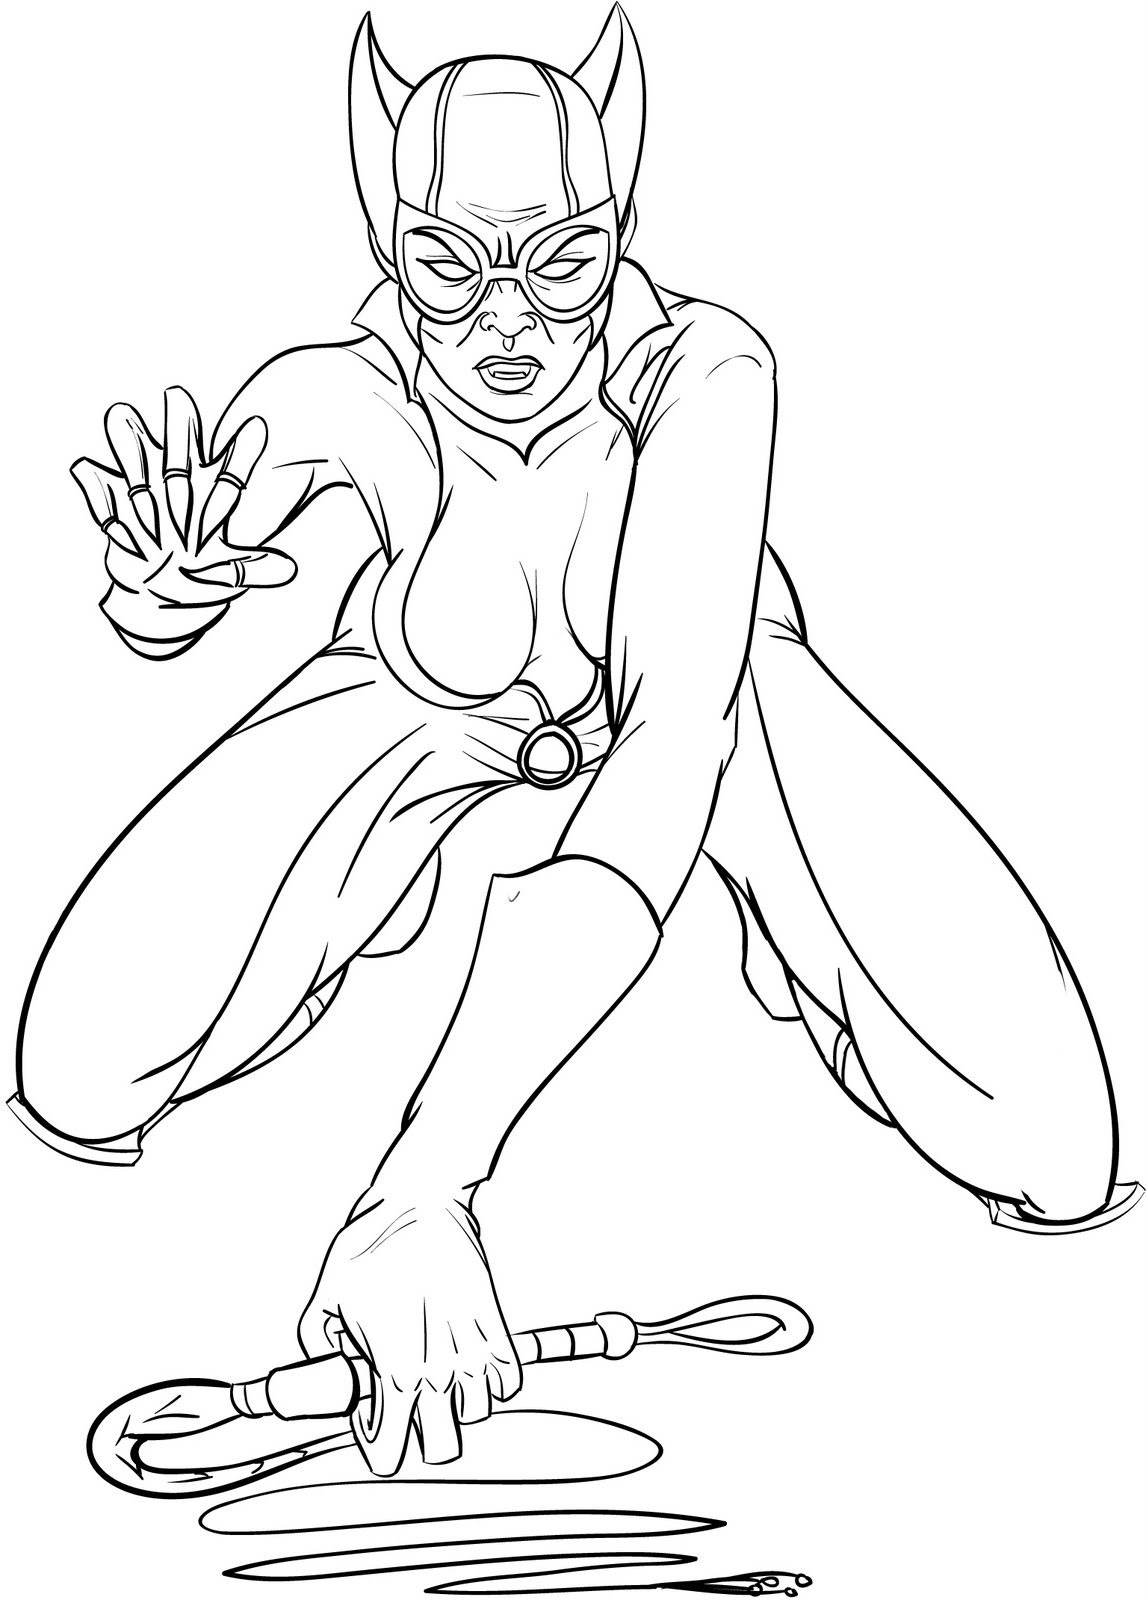 Catwoman Coloring Pages at GetColorings.com | Free printable colorings